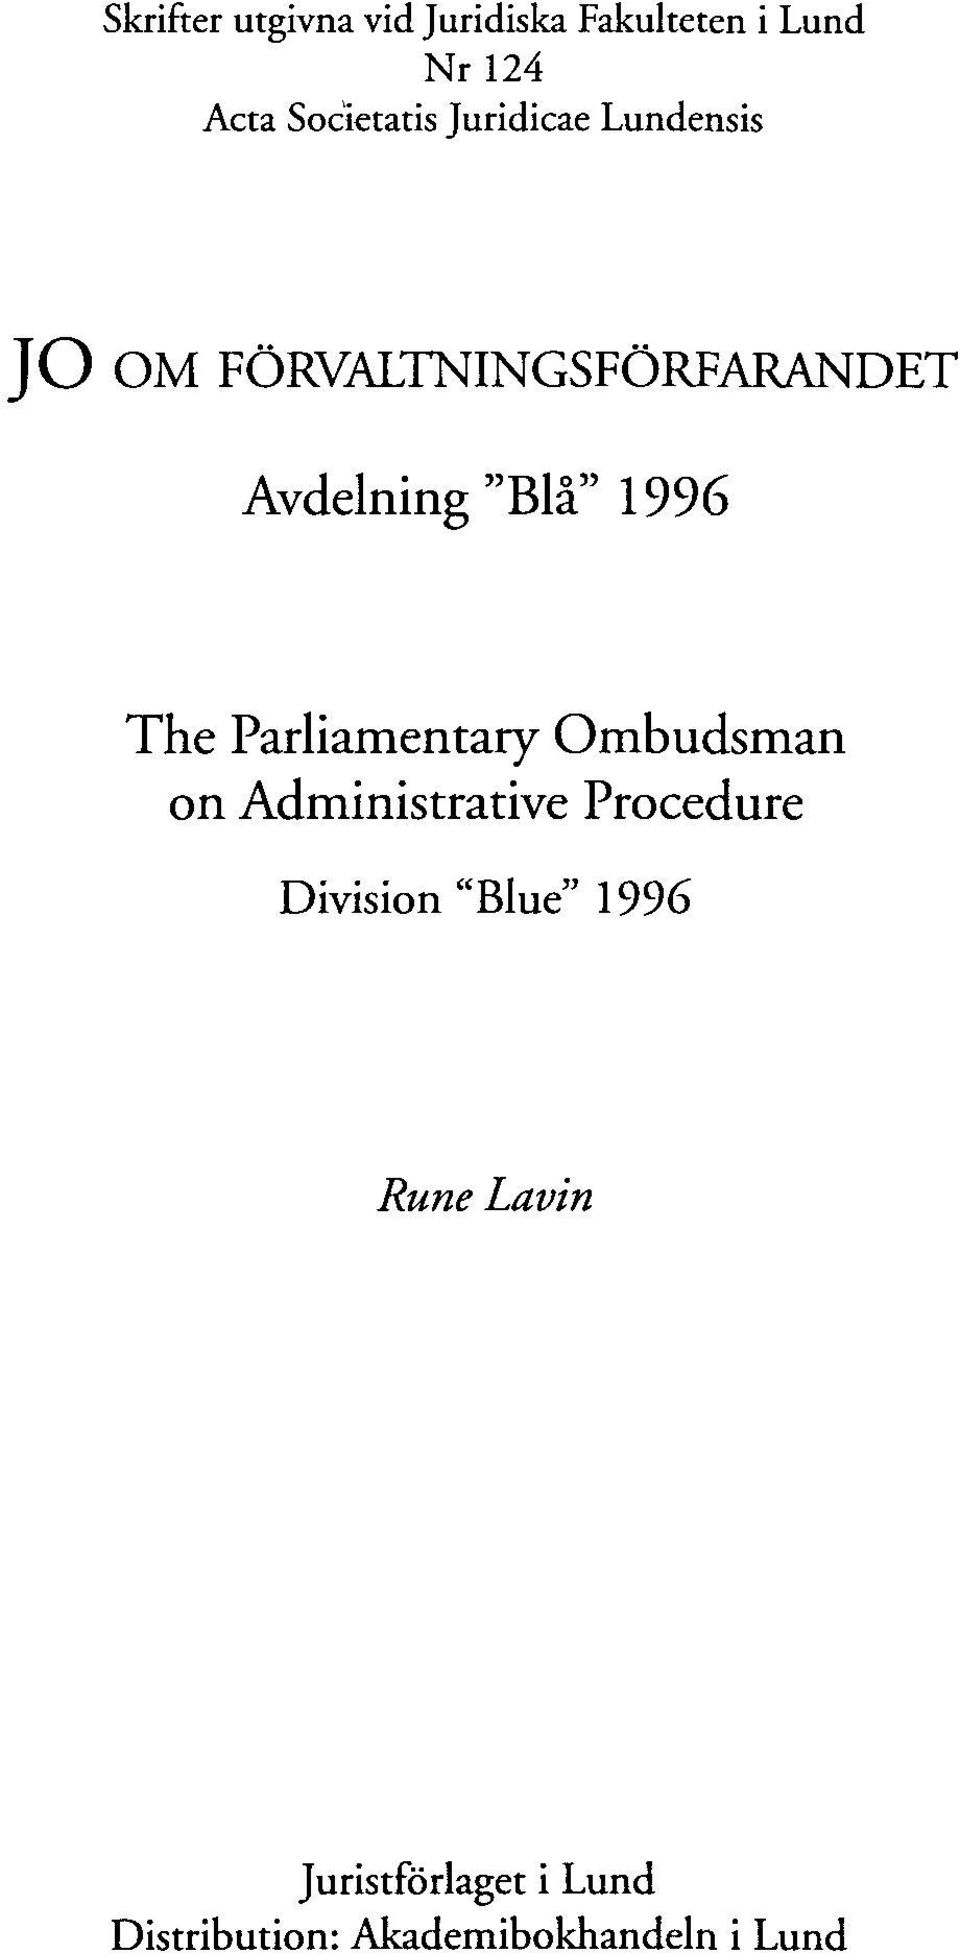 The Parliamentary Ombudsman on Administrative Procedure Division "Blue"